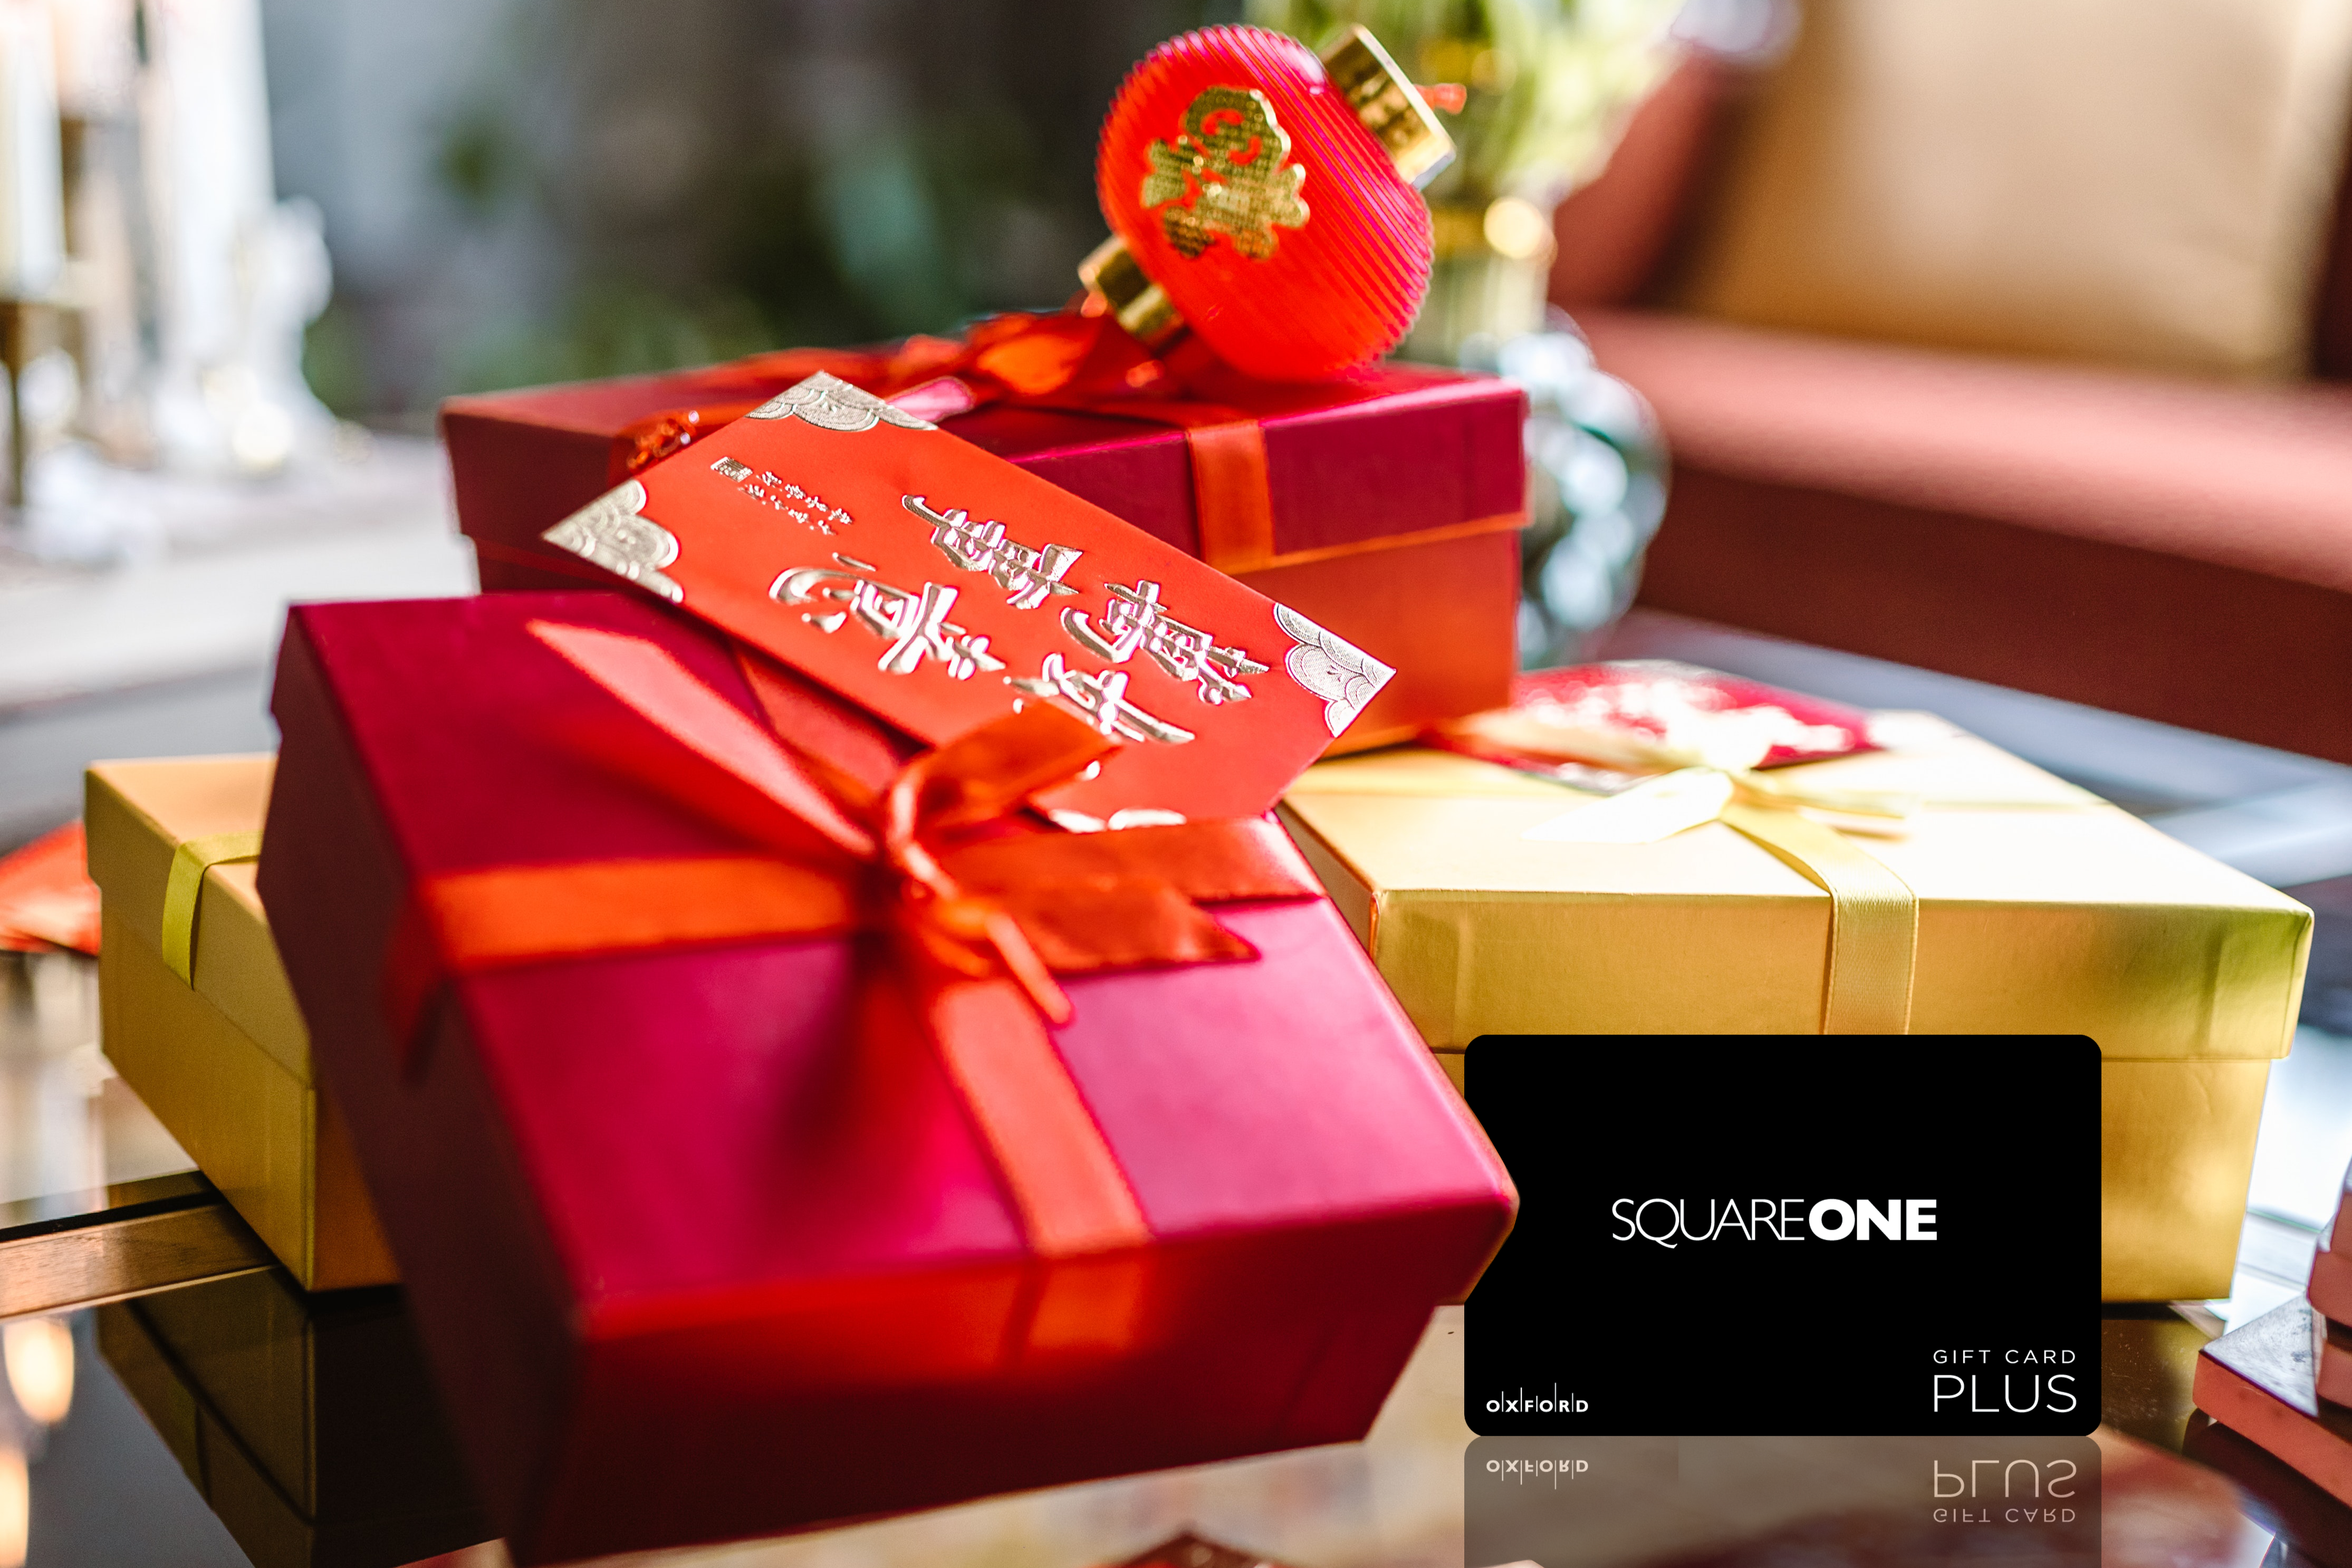 promotional image for square one gift card for LNY